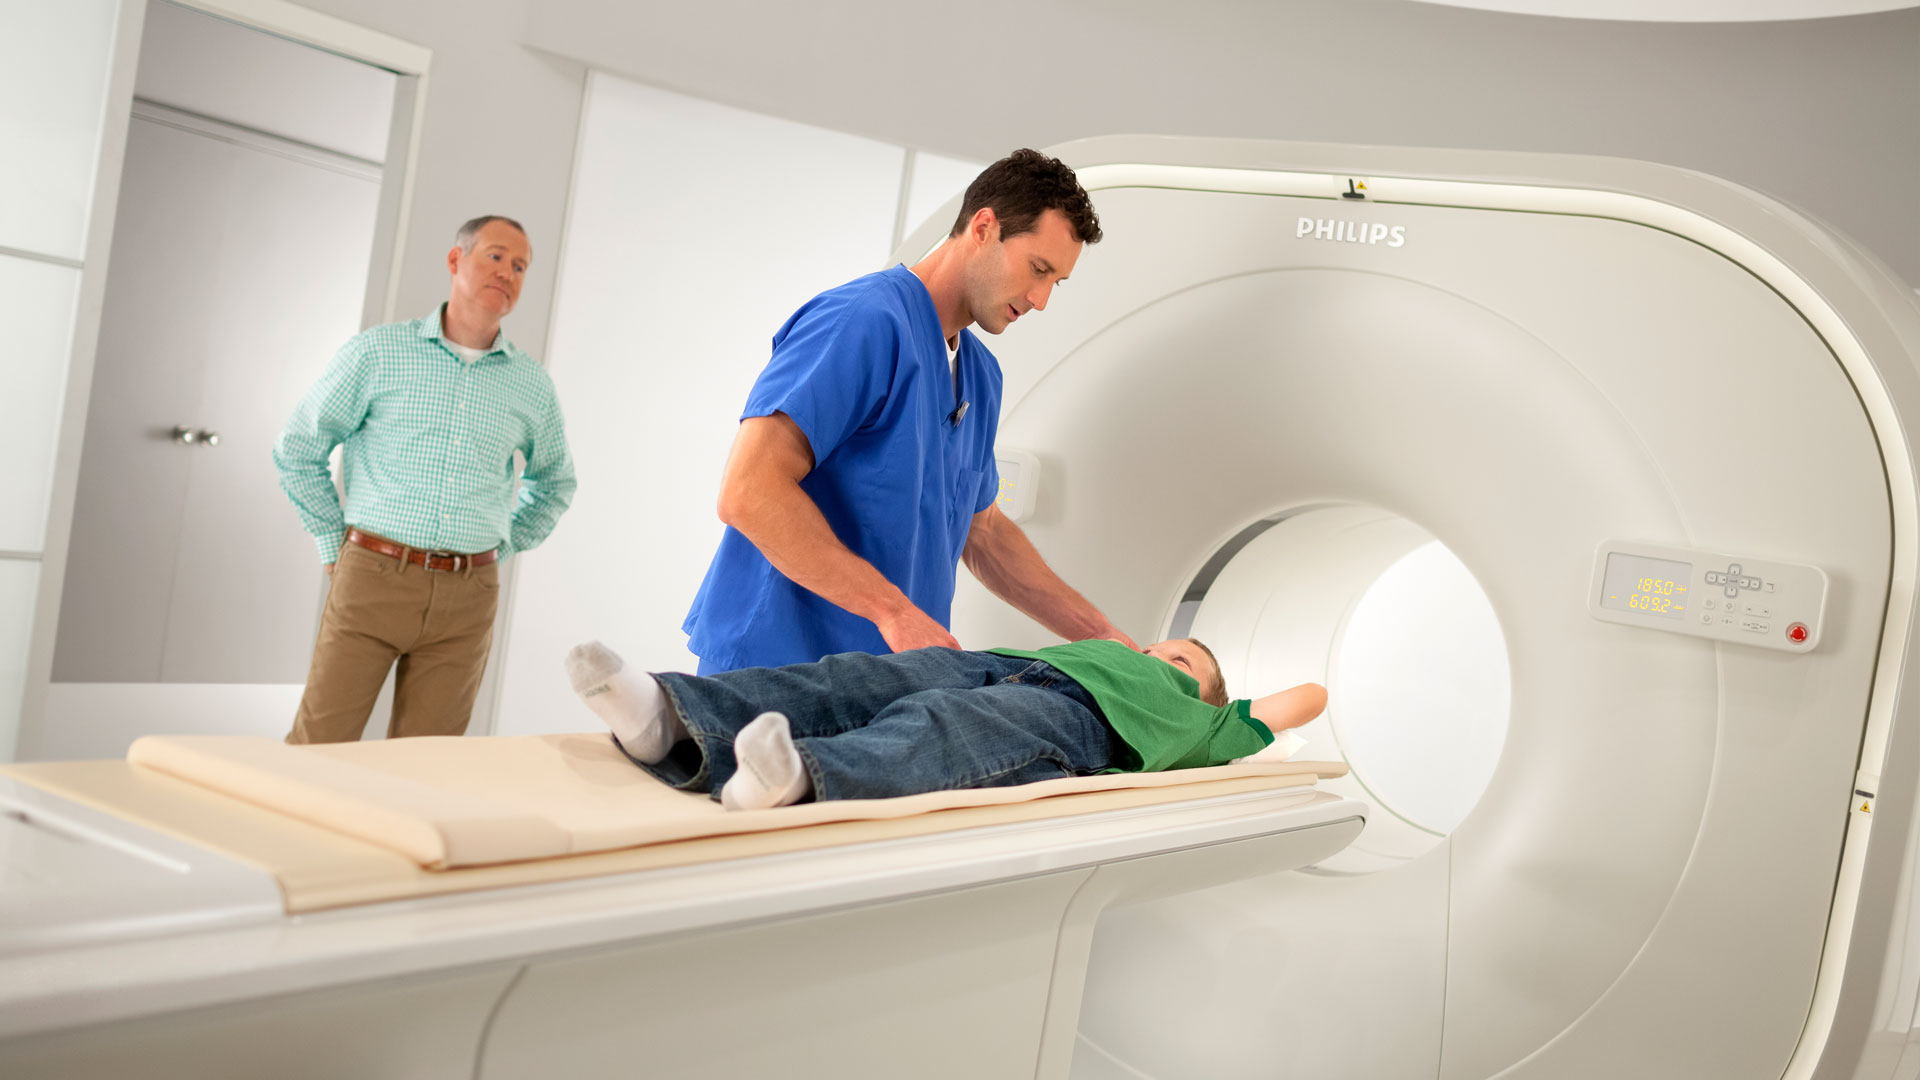 Philips diagnostic imaging system